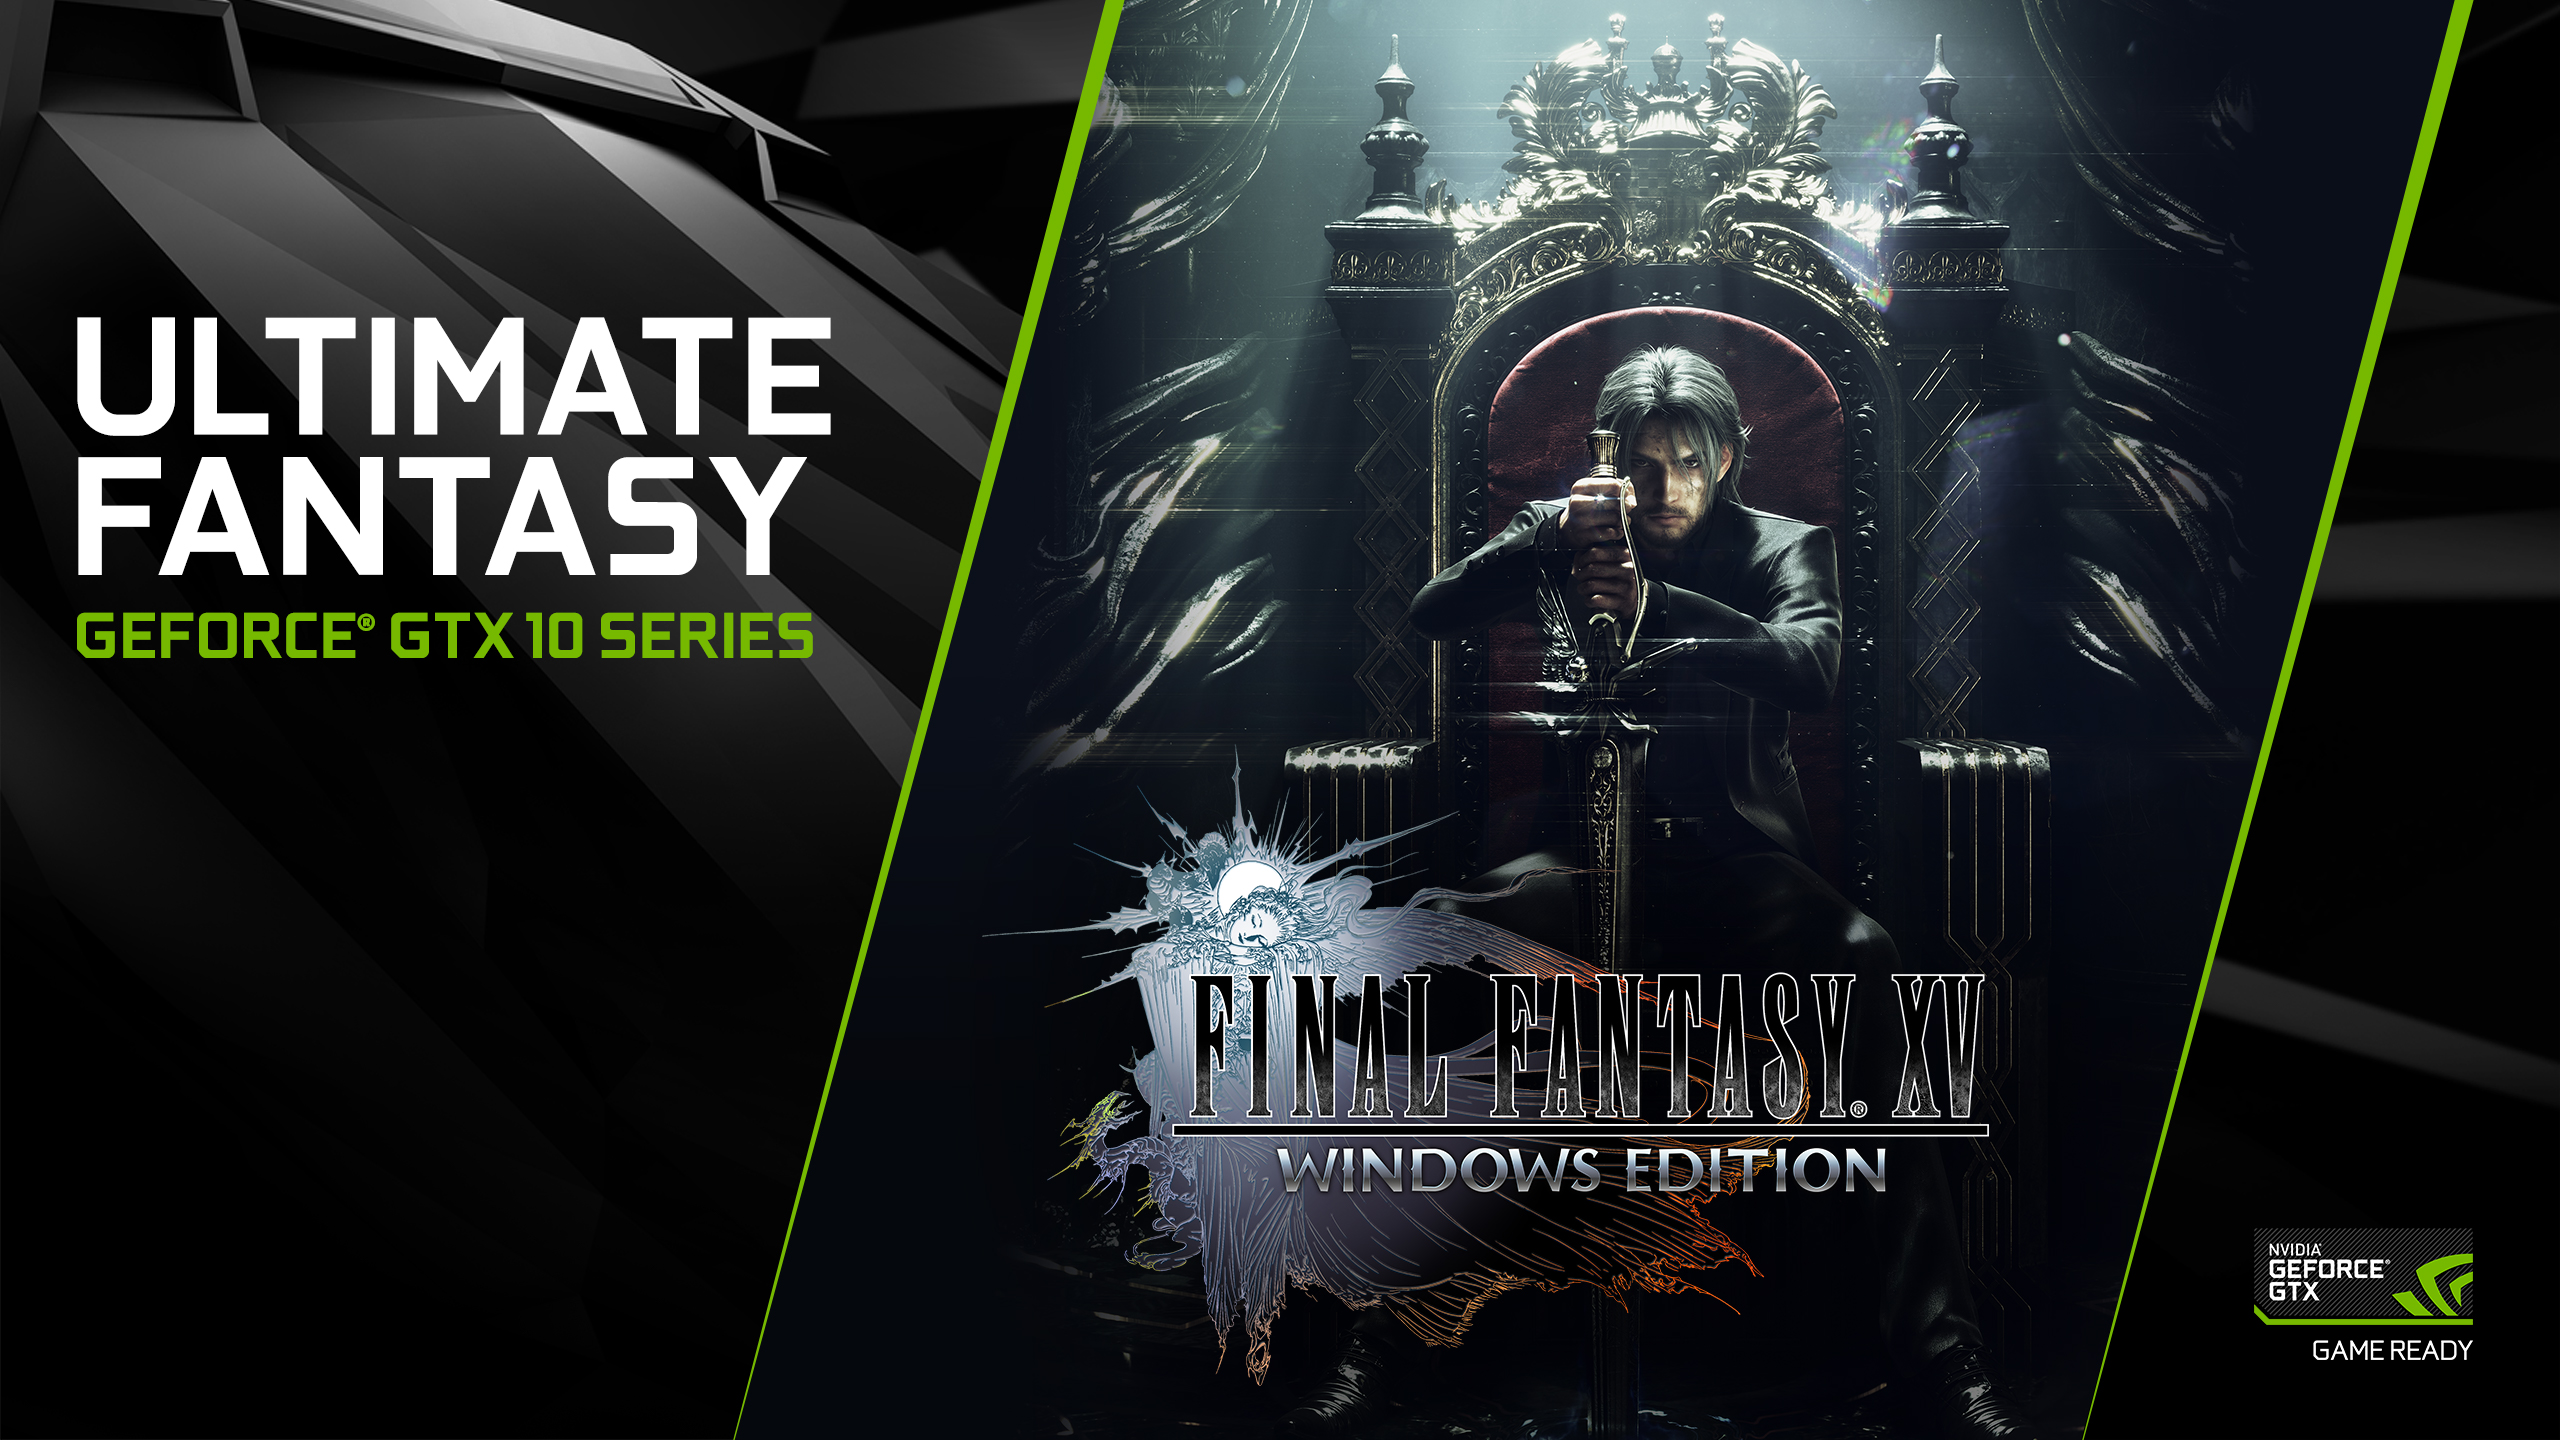 Final Fantasy Xv Windows Edition Release Date And System Requirements Revealed Benchmark Coming Soon